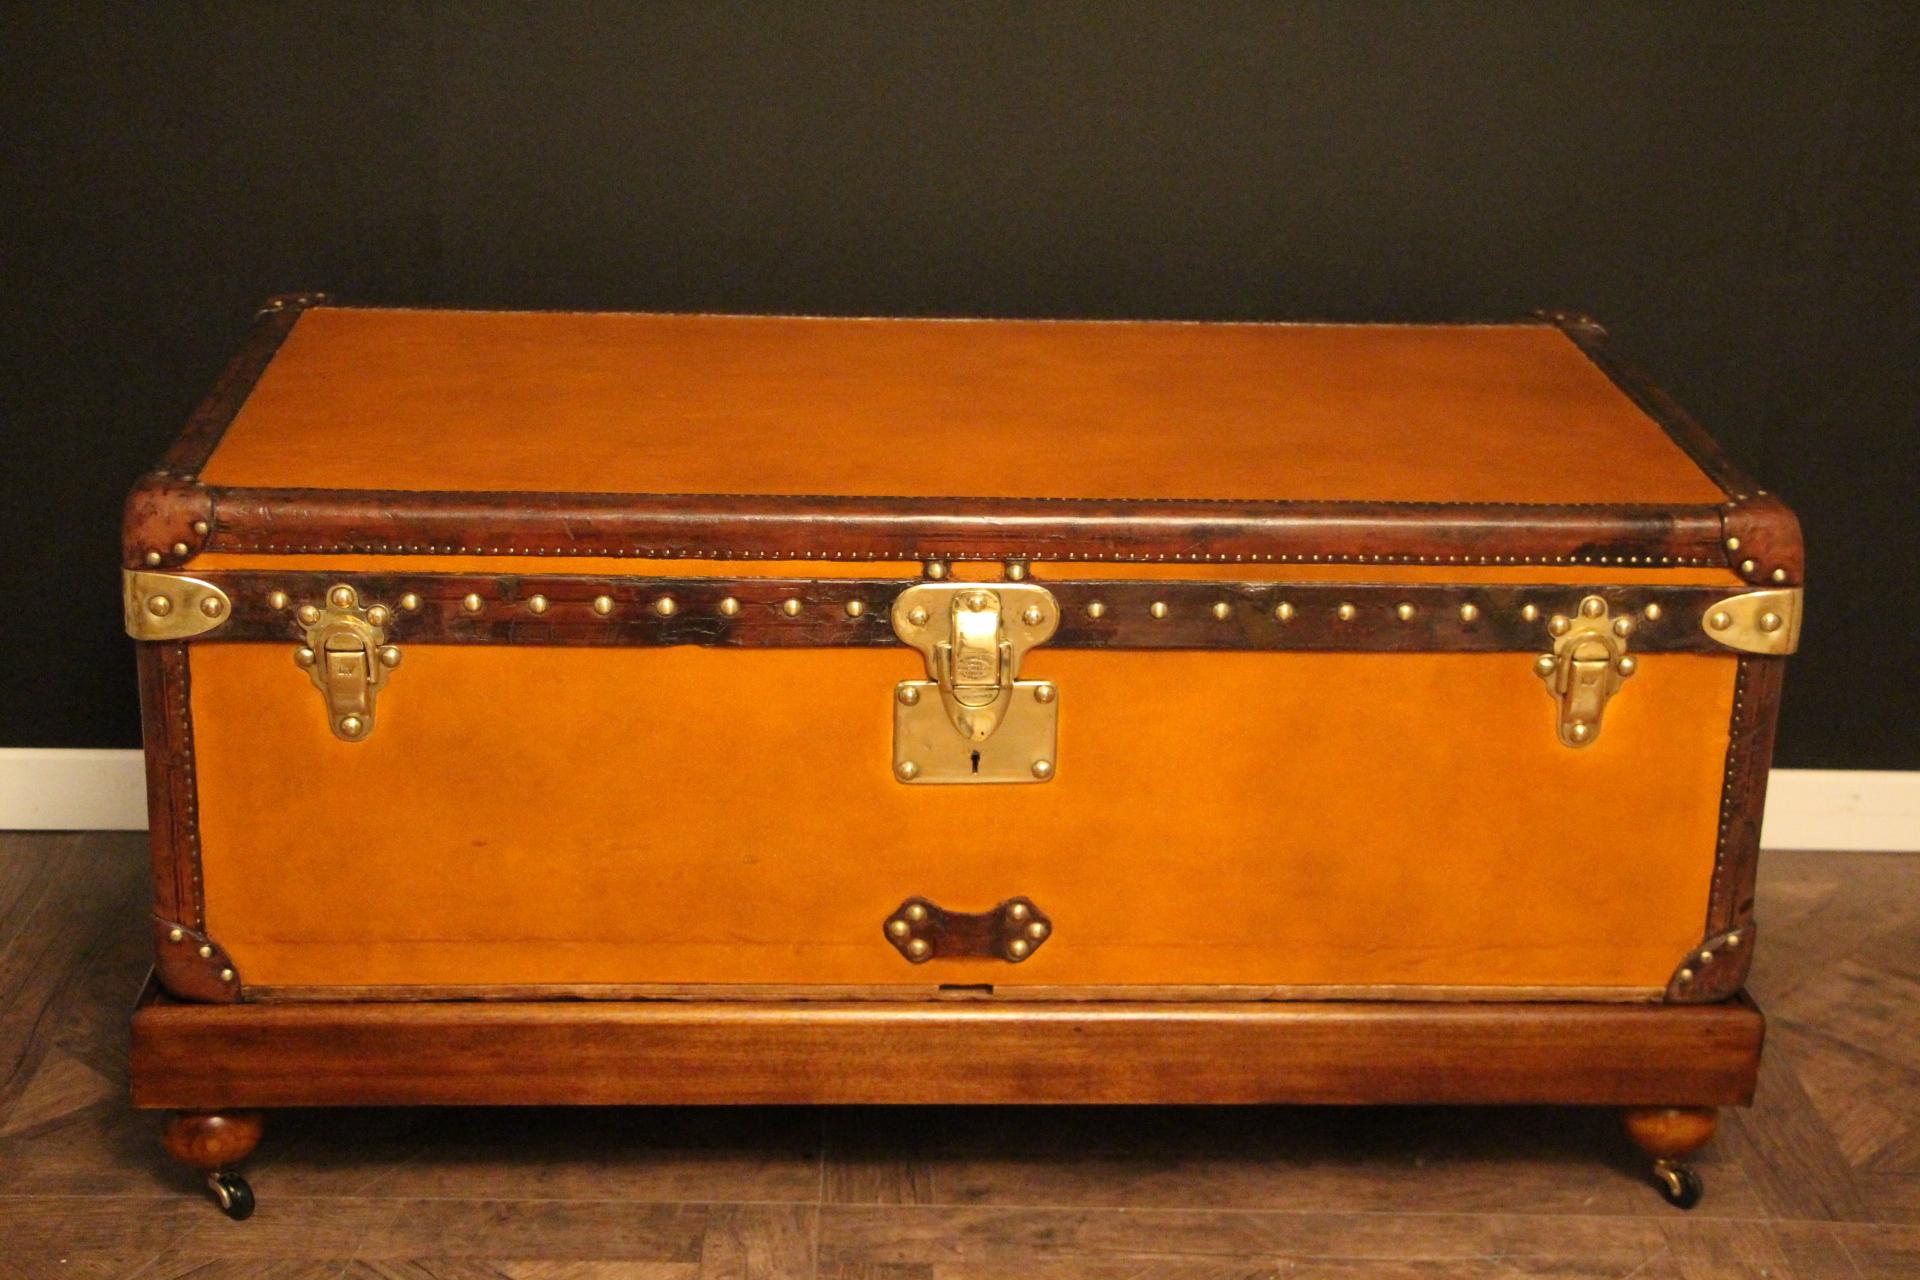 This very nice orange canvas Louis Vuitton steamer trunk, features Louis Vuitton stamped solid brass lock, clasps as well as all its studs. Beautiful and rich chocolate color leather trim and handles. Unusual and elegant proportions.
It is